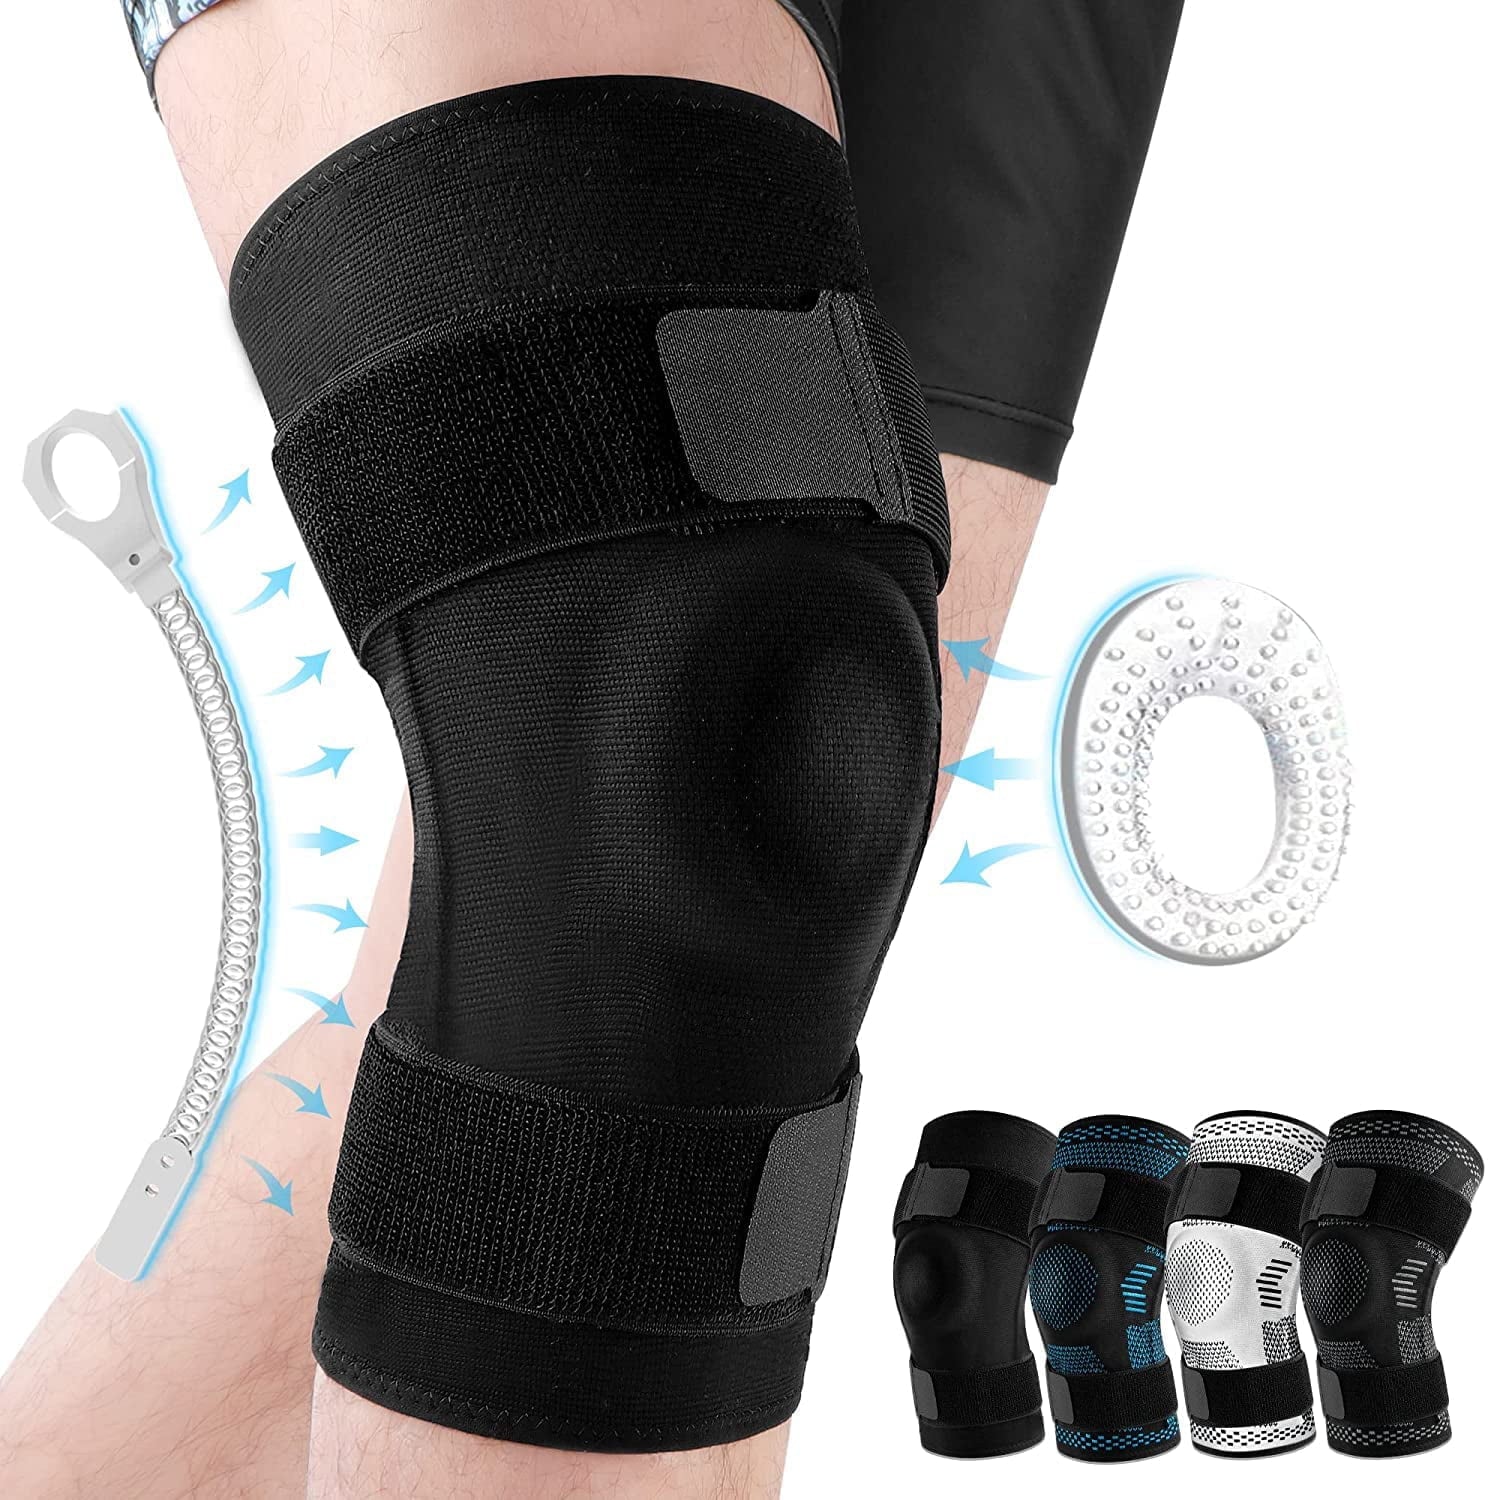 NEENCA Knee Sleeve – Knee Braces for Knee Pain, Joint Pain Relief,  Swelling, Inflammation Relief, and Circulation, Knee Support for Women and  Men